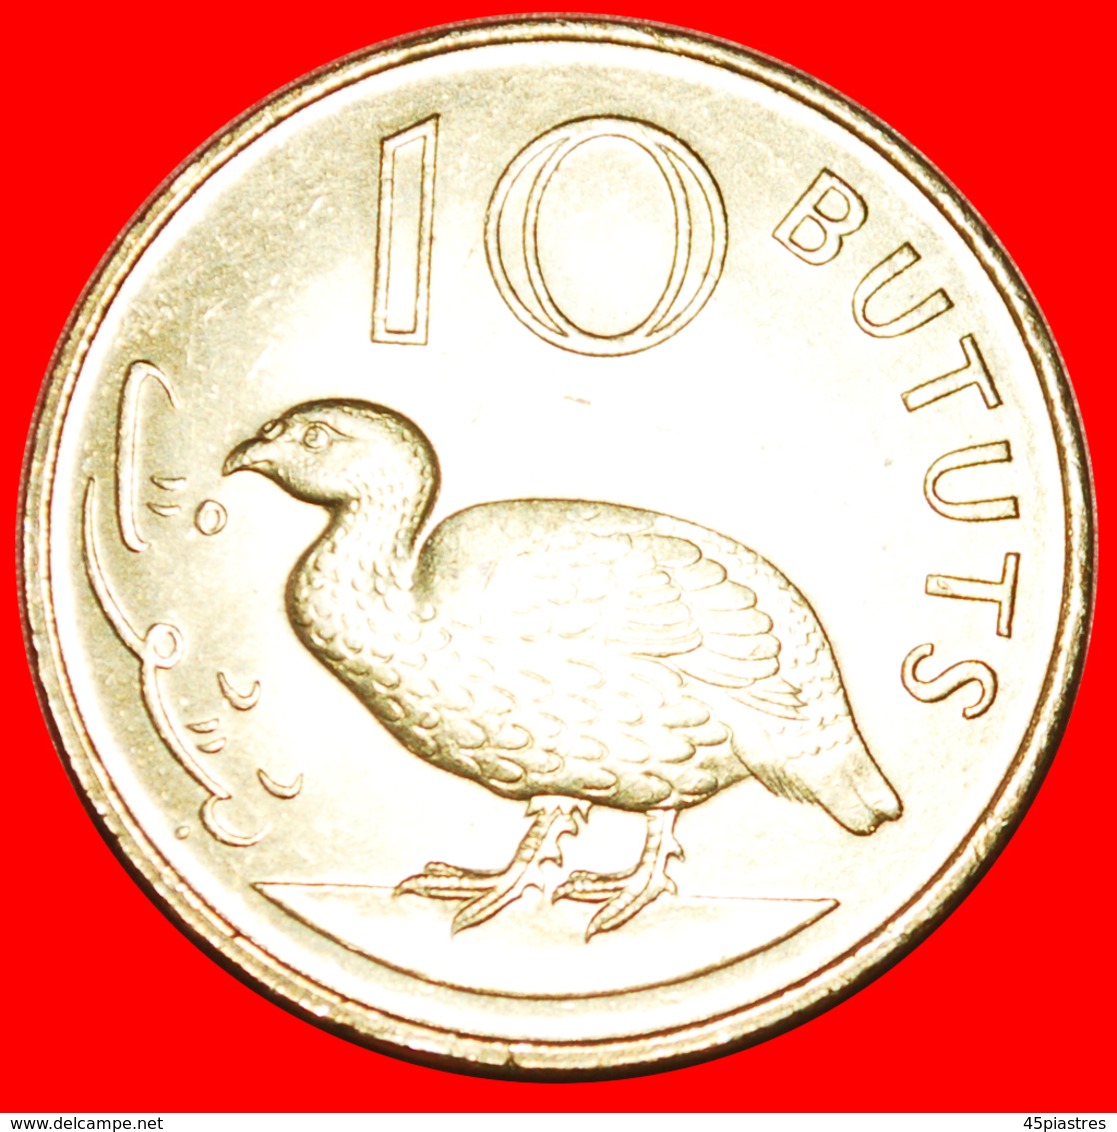 + BIRD: THE GAMBIA ★ 10 BUTUTS 1971 UNC MINT LUSTER!  LOW START ★ NO RESERVE! - Gambia